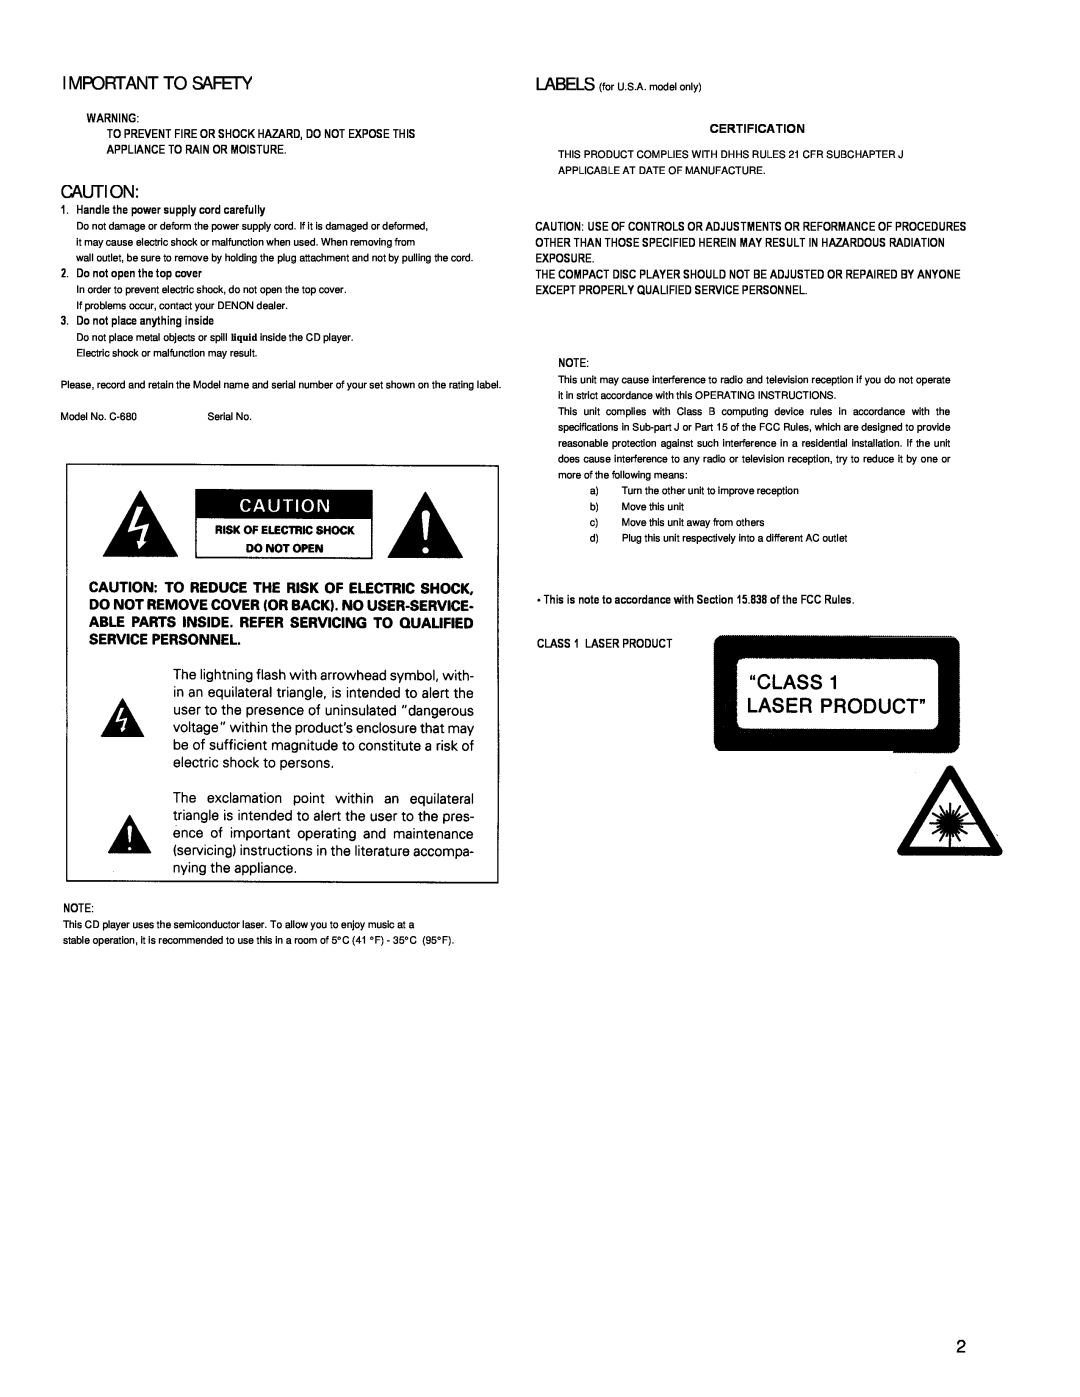 Denon DN-C680 manual Important To Safety 